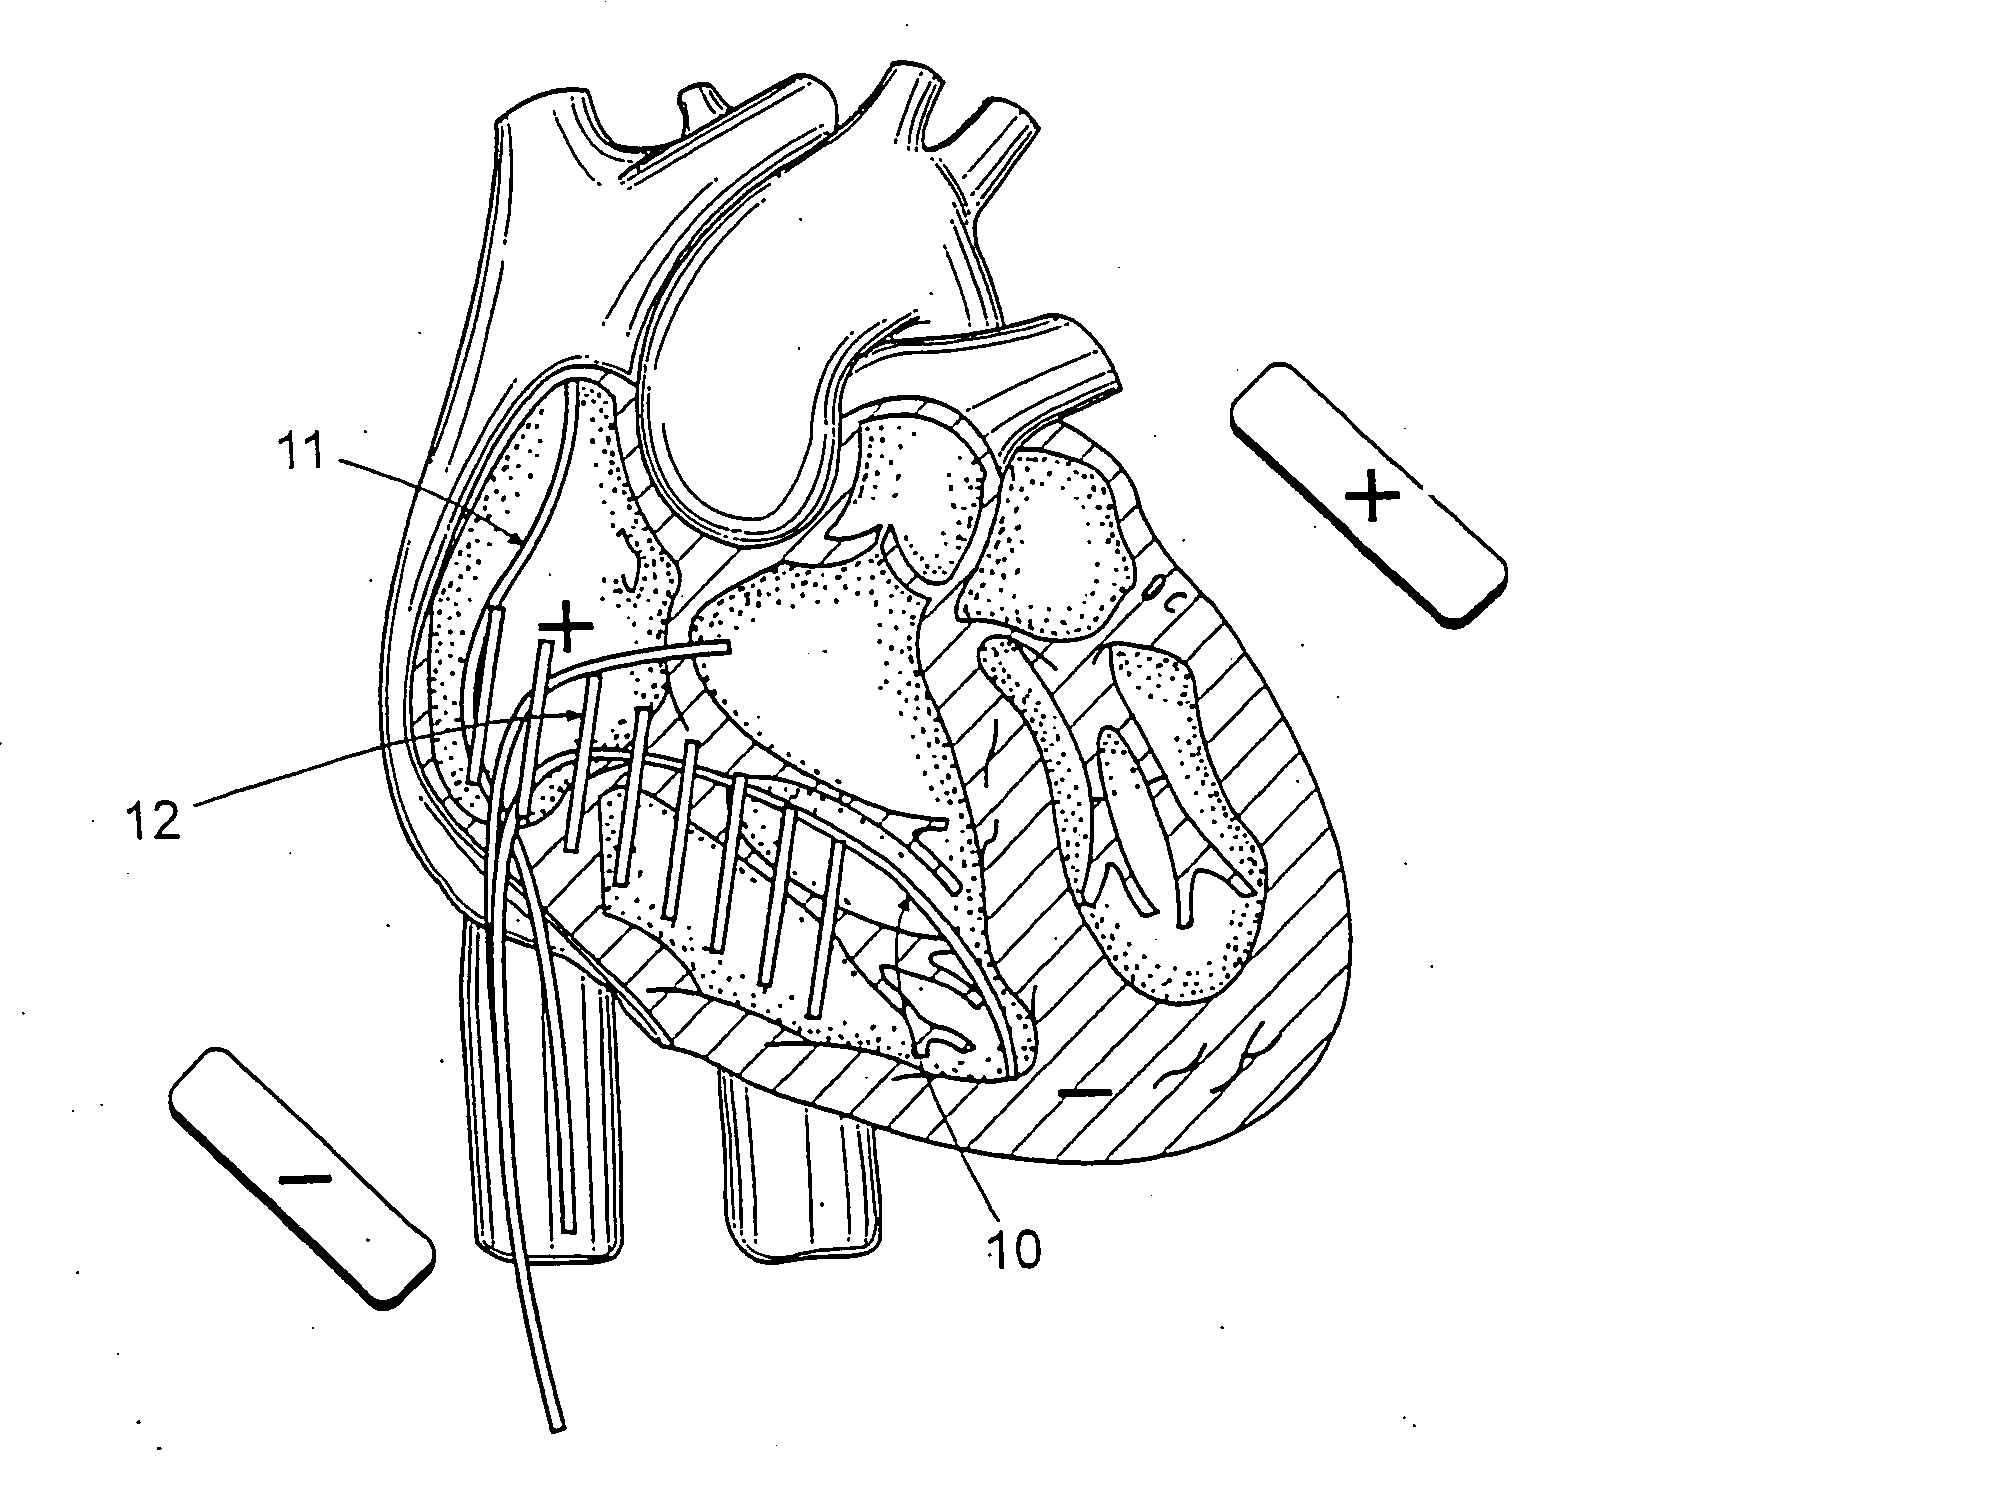 Apparatus and method for cardioversion